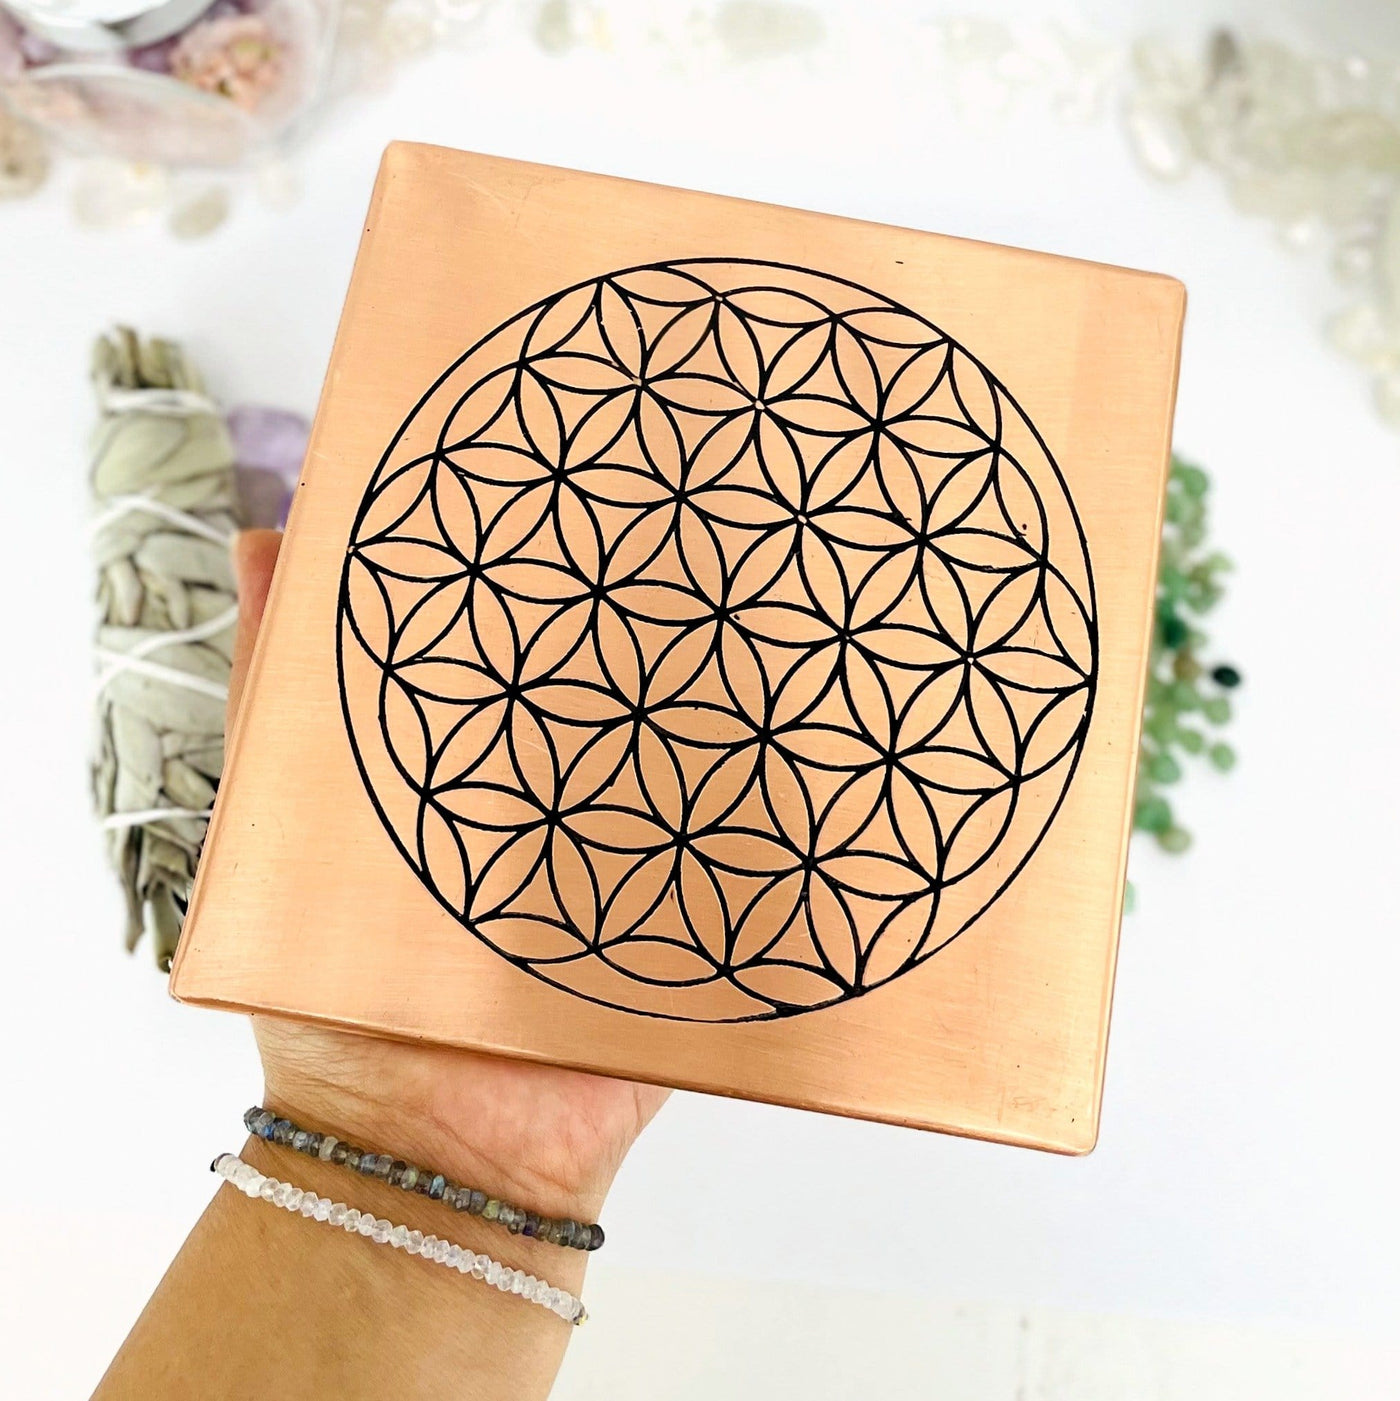 copper square flat plate with a flower of life grid in black on it held in a woman's hand